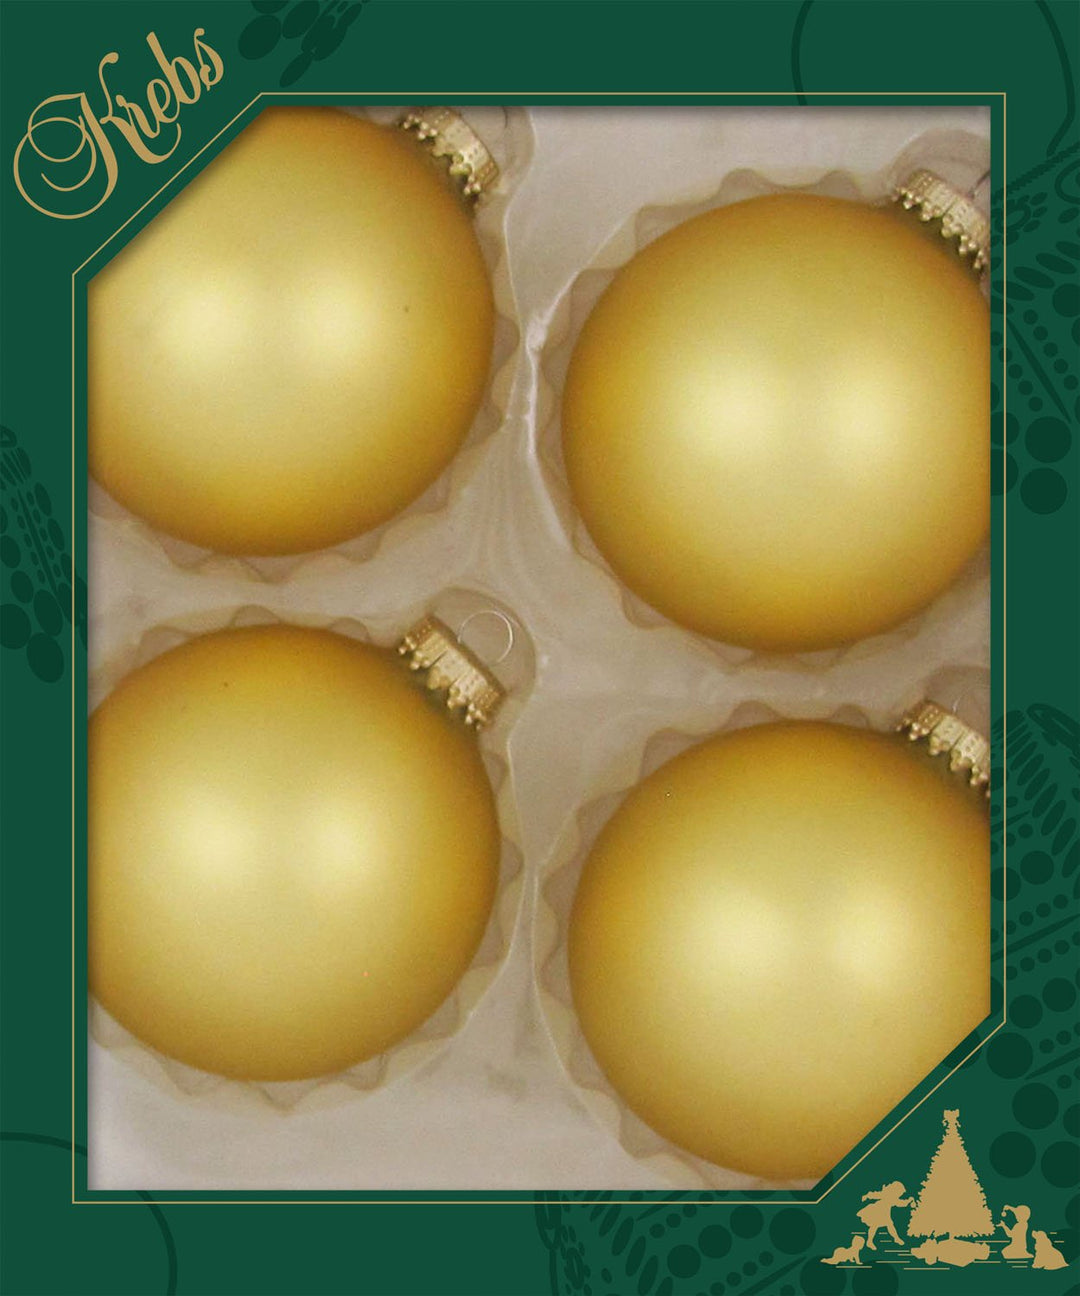 Glass Christmas Tree Ornaments - 80mm / 3.25" [4 Pieces] Designer Balls from Christmas By Krebs Seamless Hanging Holiday Decor (Gold Velvet)